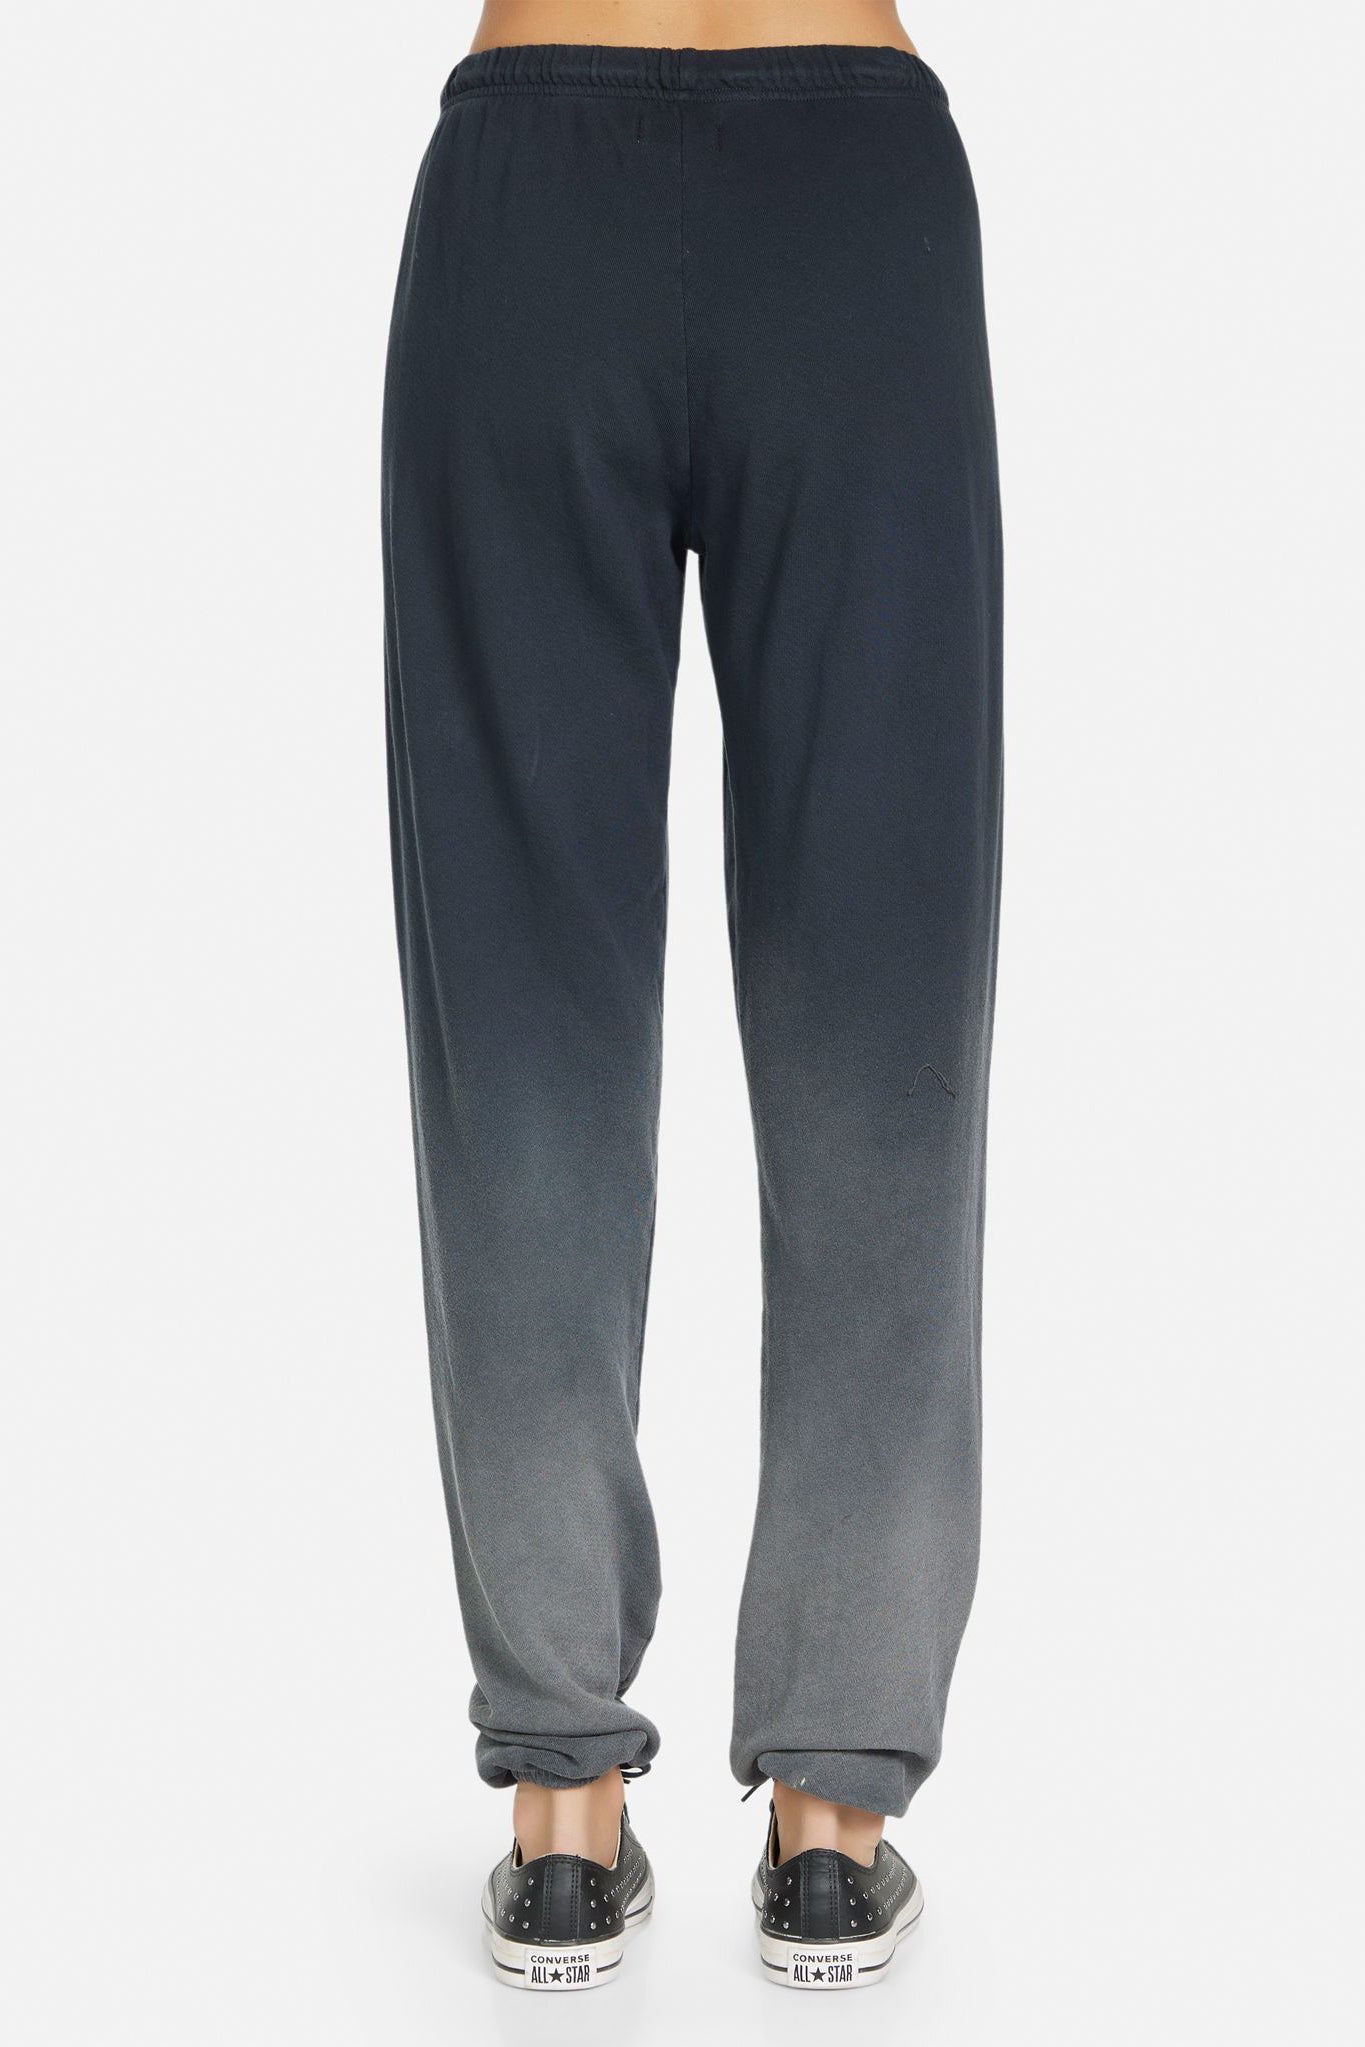 Tanzy Butterfly Sweatpant